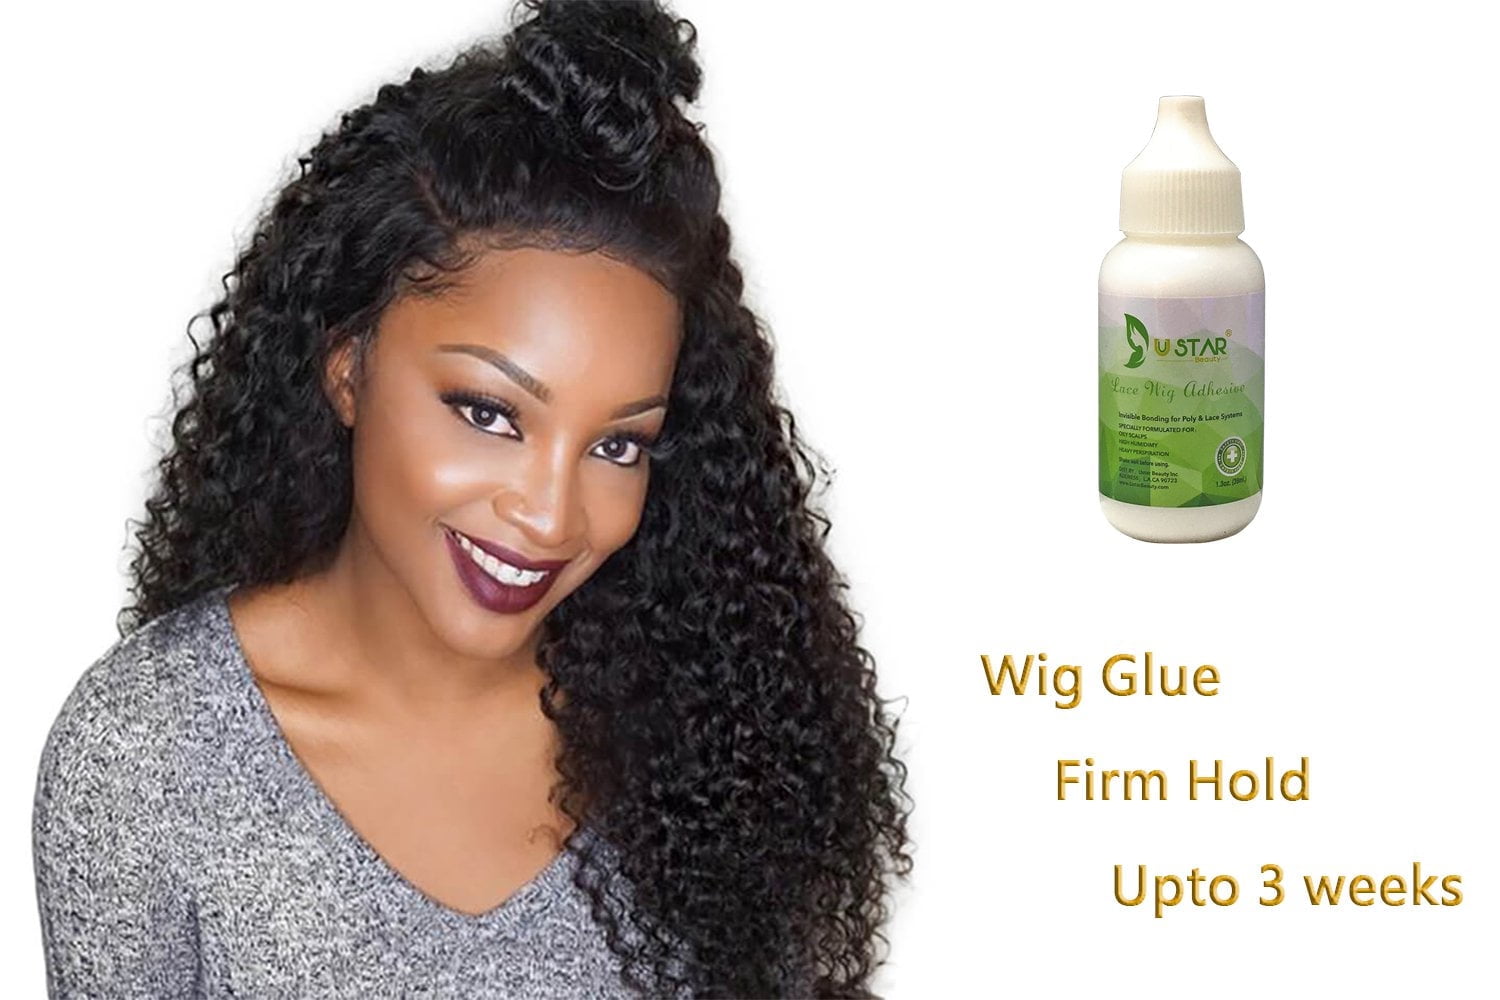 Anti-Fungus Hair Lace Wig Cap 1oz White Bonding Adhesive Glue and Remover, Size: One Size